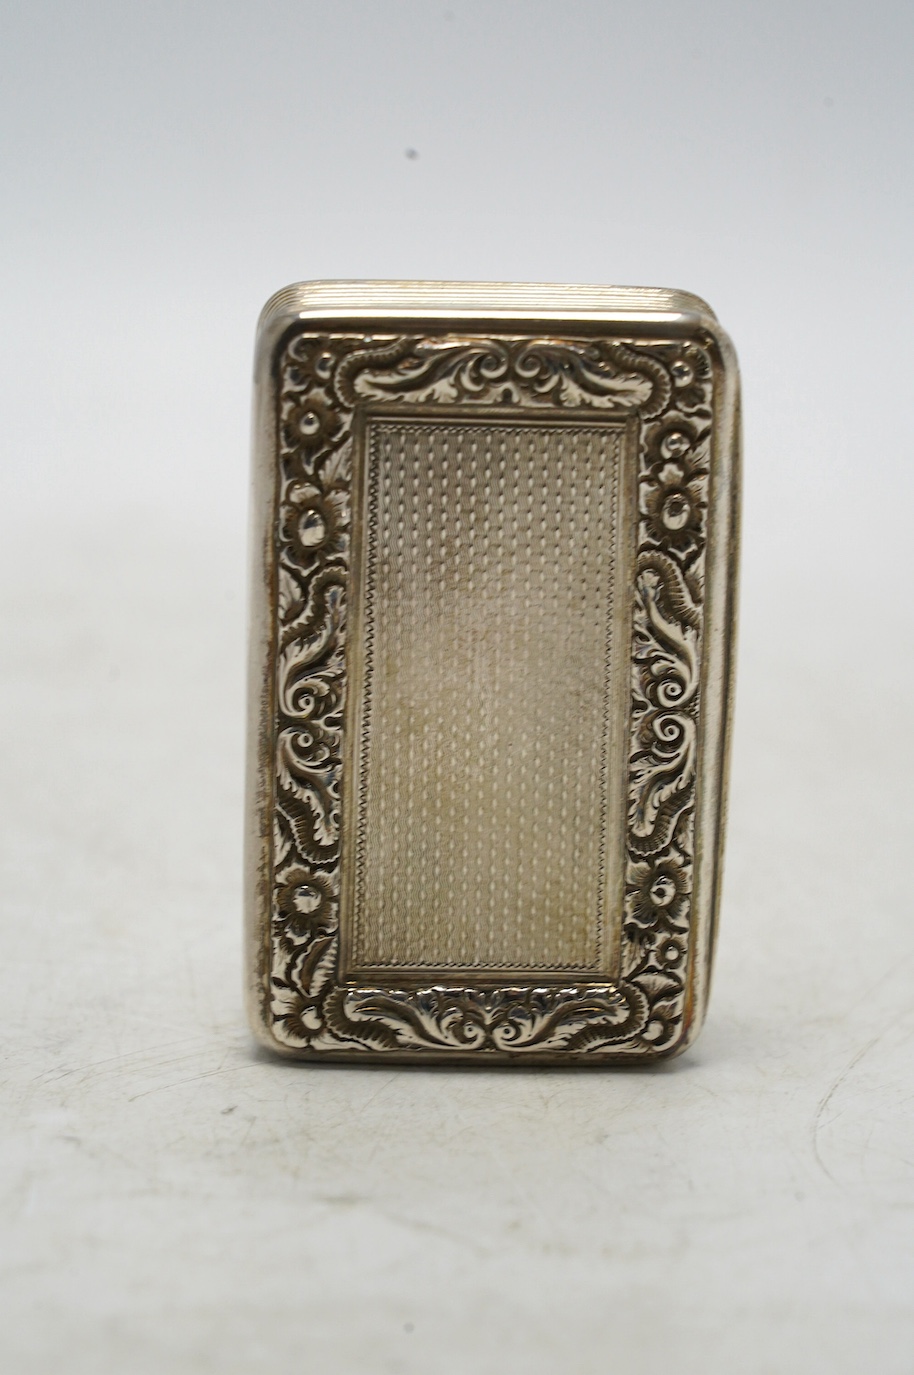 A late George III engine turned silver snuff box, William Elliot, London, 1819, 74mm, with interior engraved inscription. Condition - fair to good